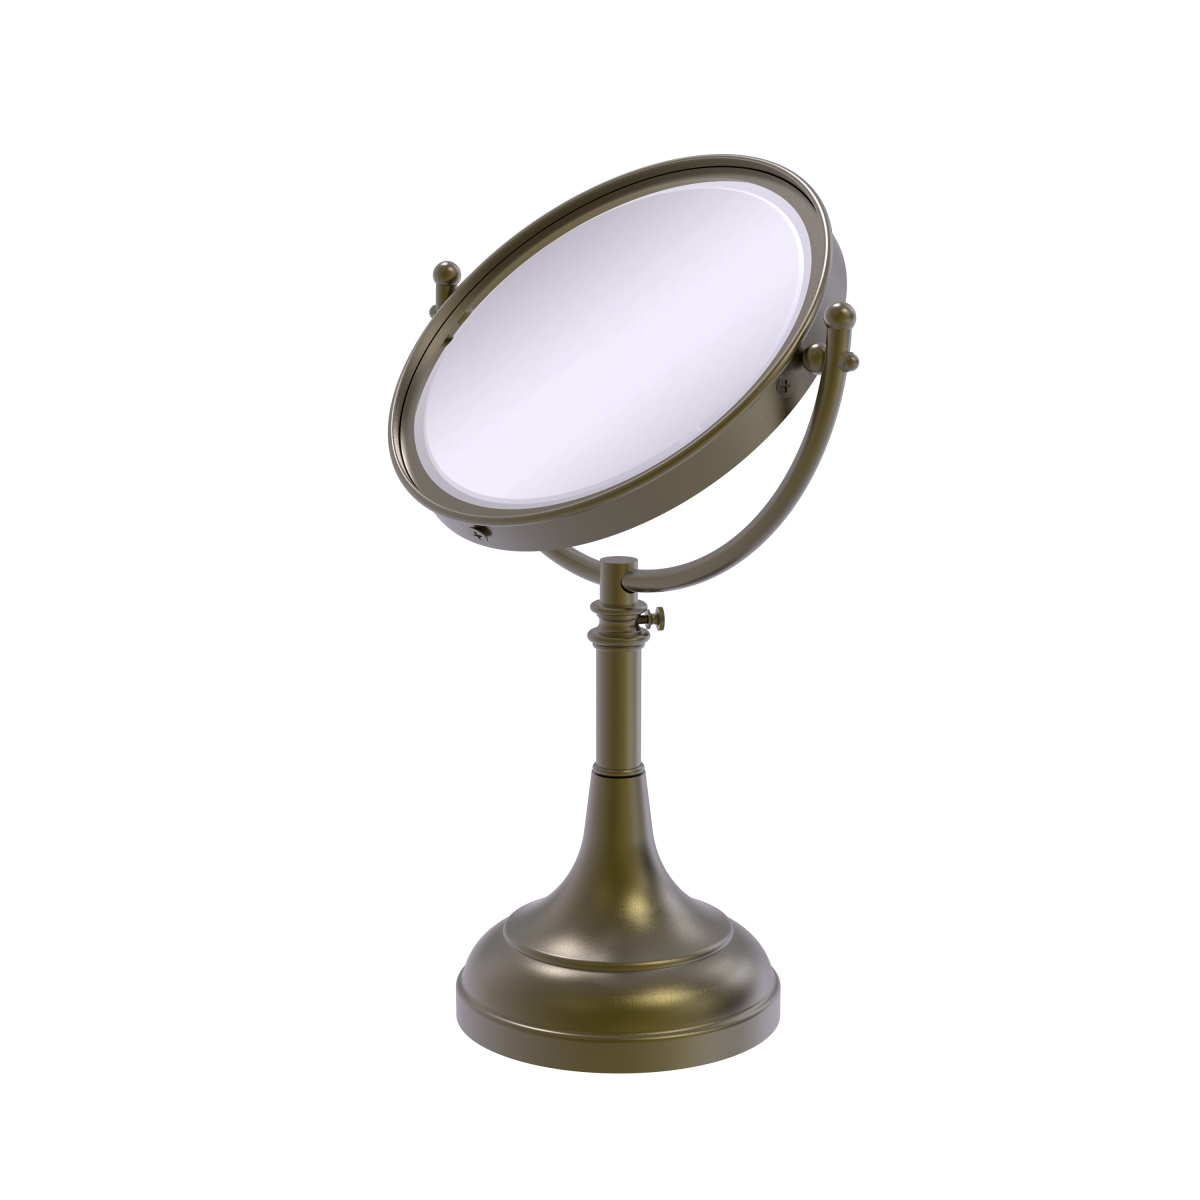 Picture of Allied Brass DM-1-2X-ABR 8 in. Height Adjustable Vanity Top Make-Up Mirror 2X Magnification, Antique Brass